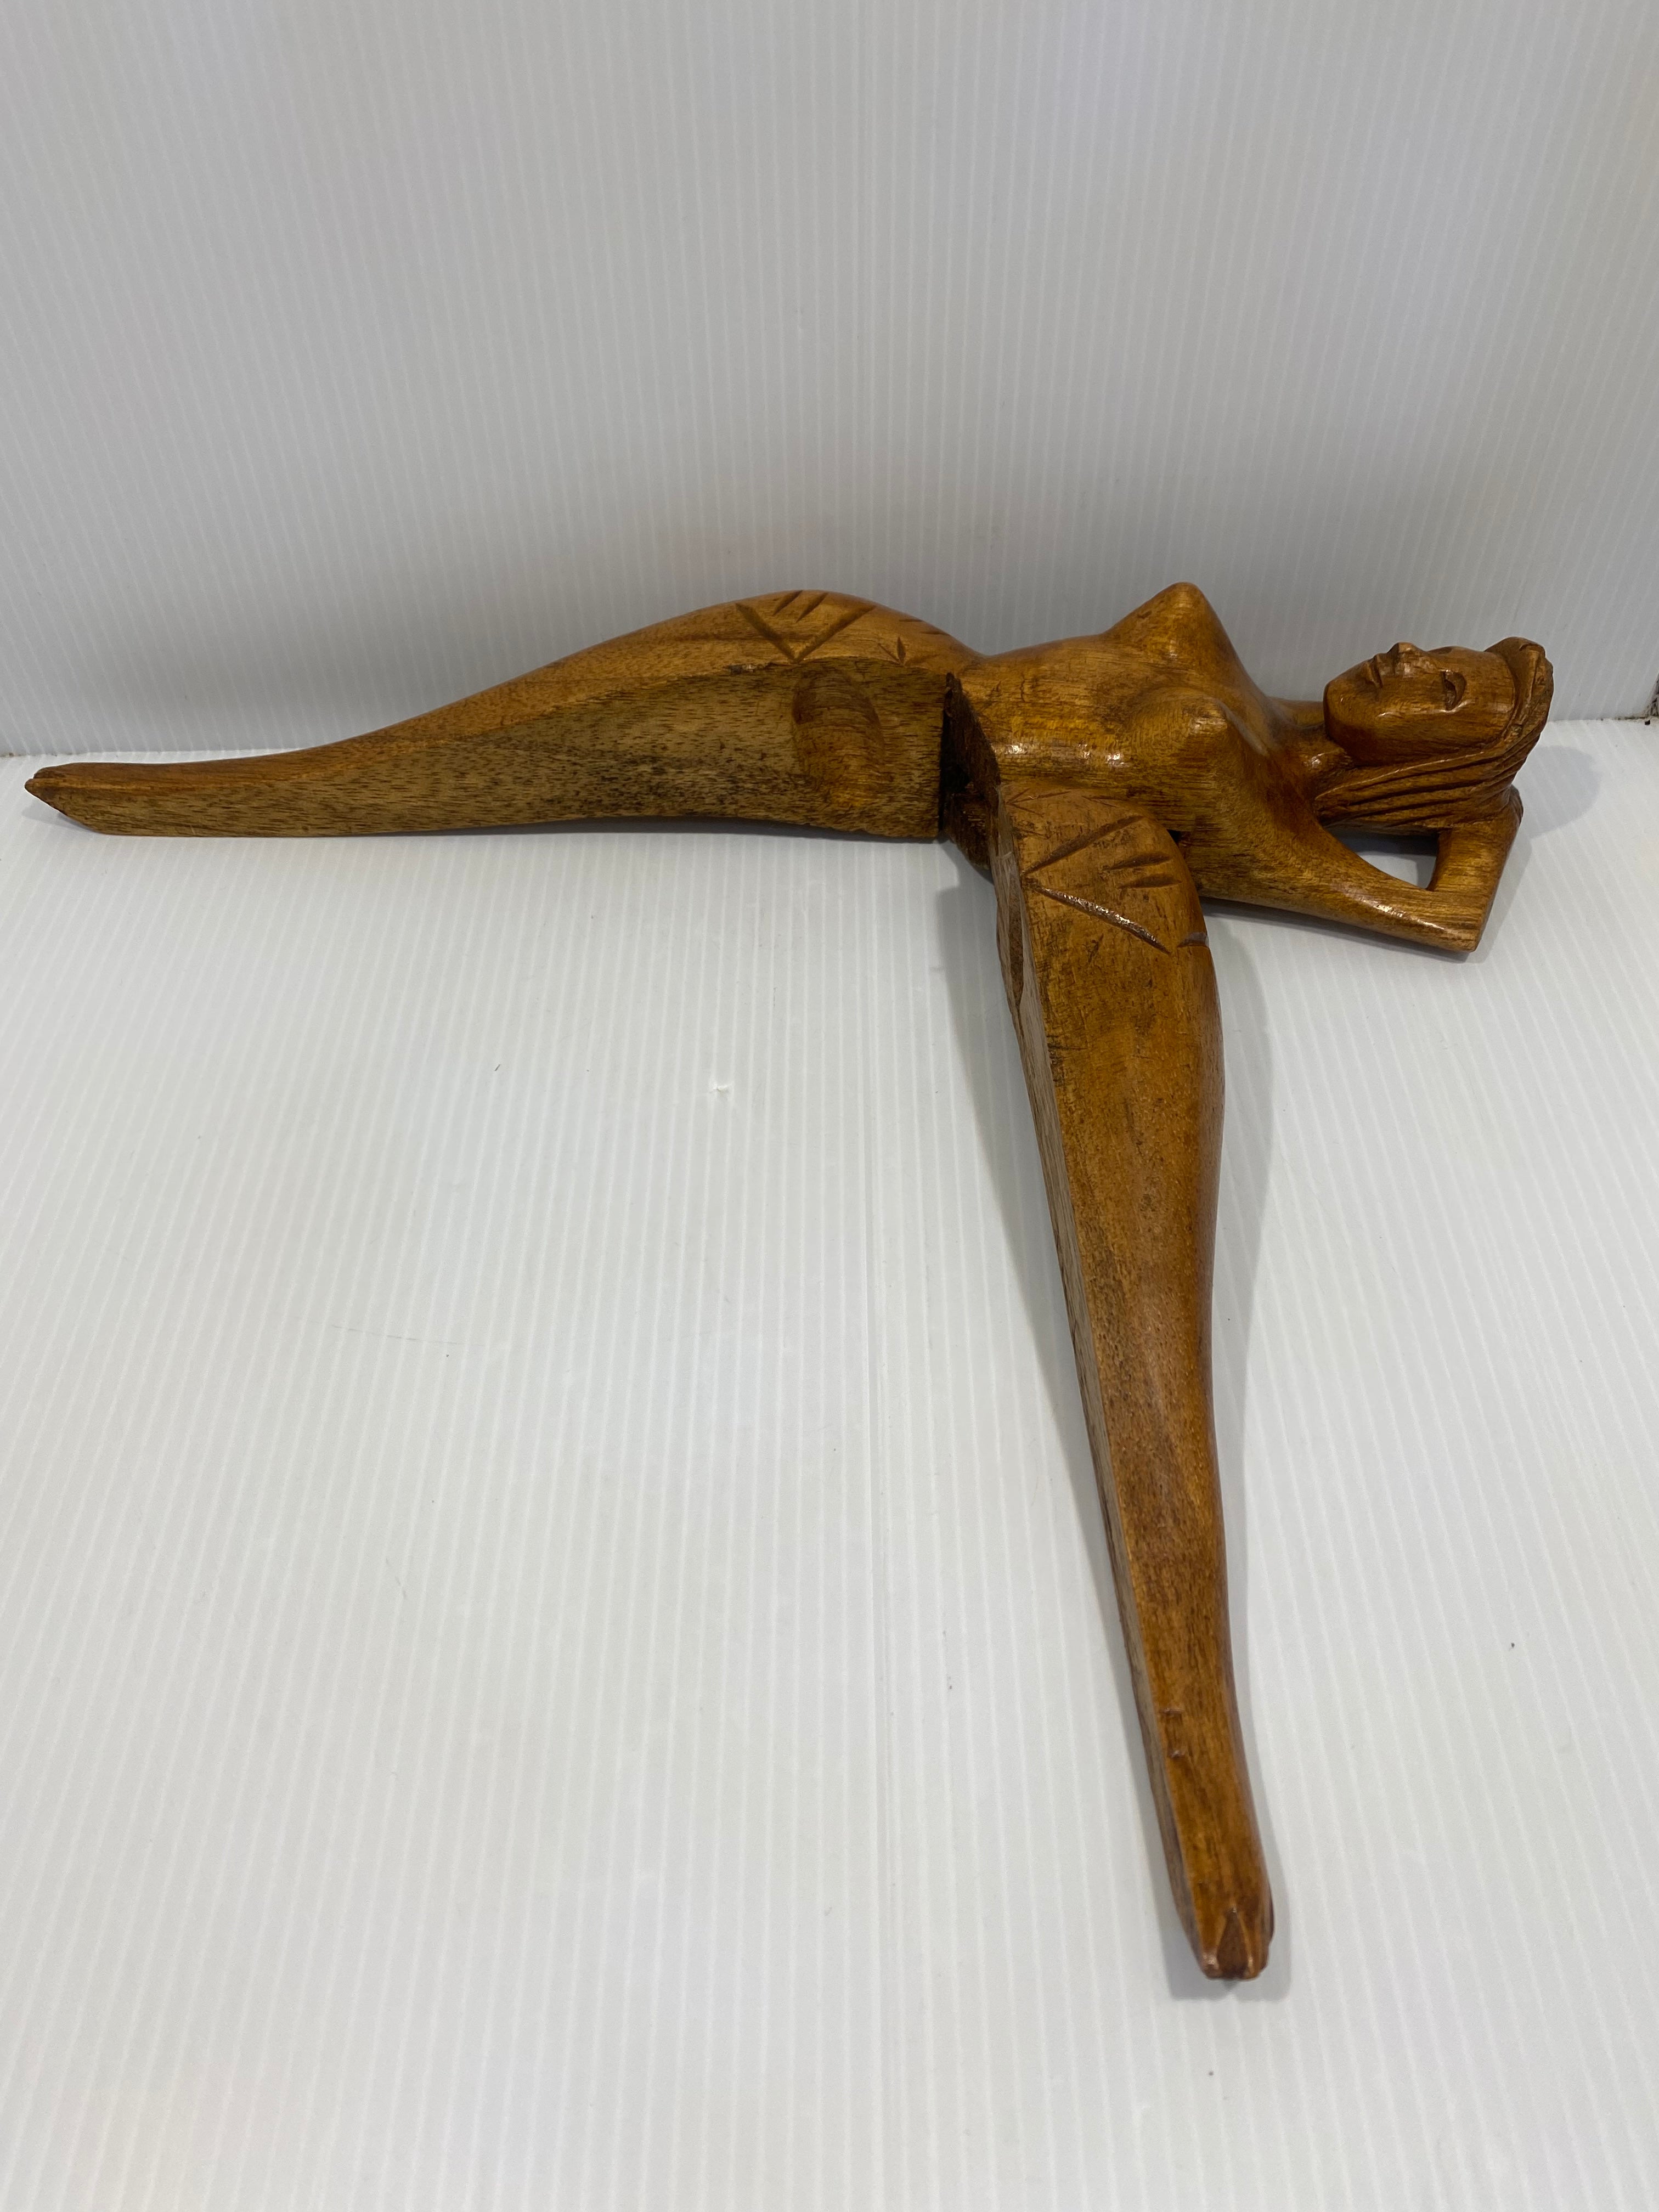 Rare and original woman Flex Leg Nutcracker 1950s Wood Carving . Made in Germany